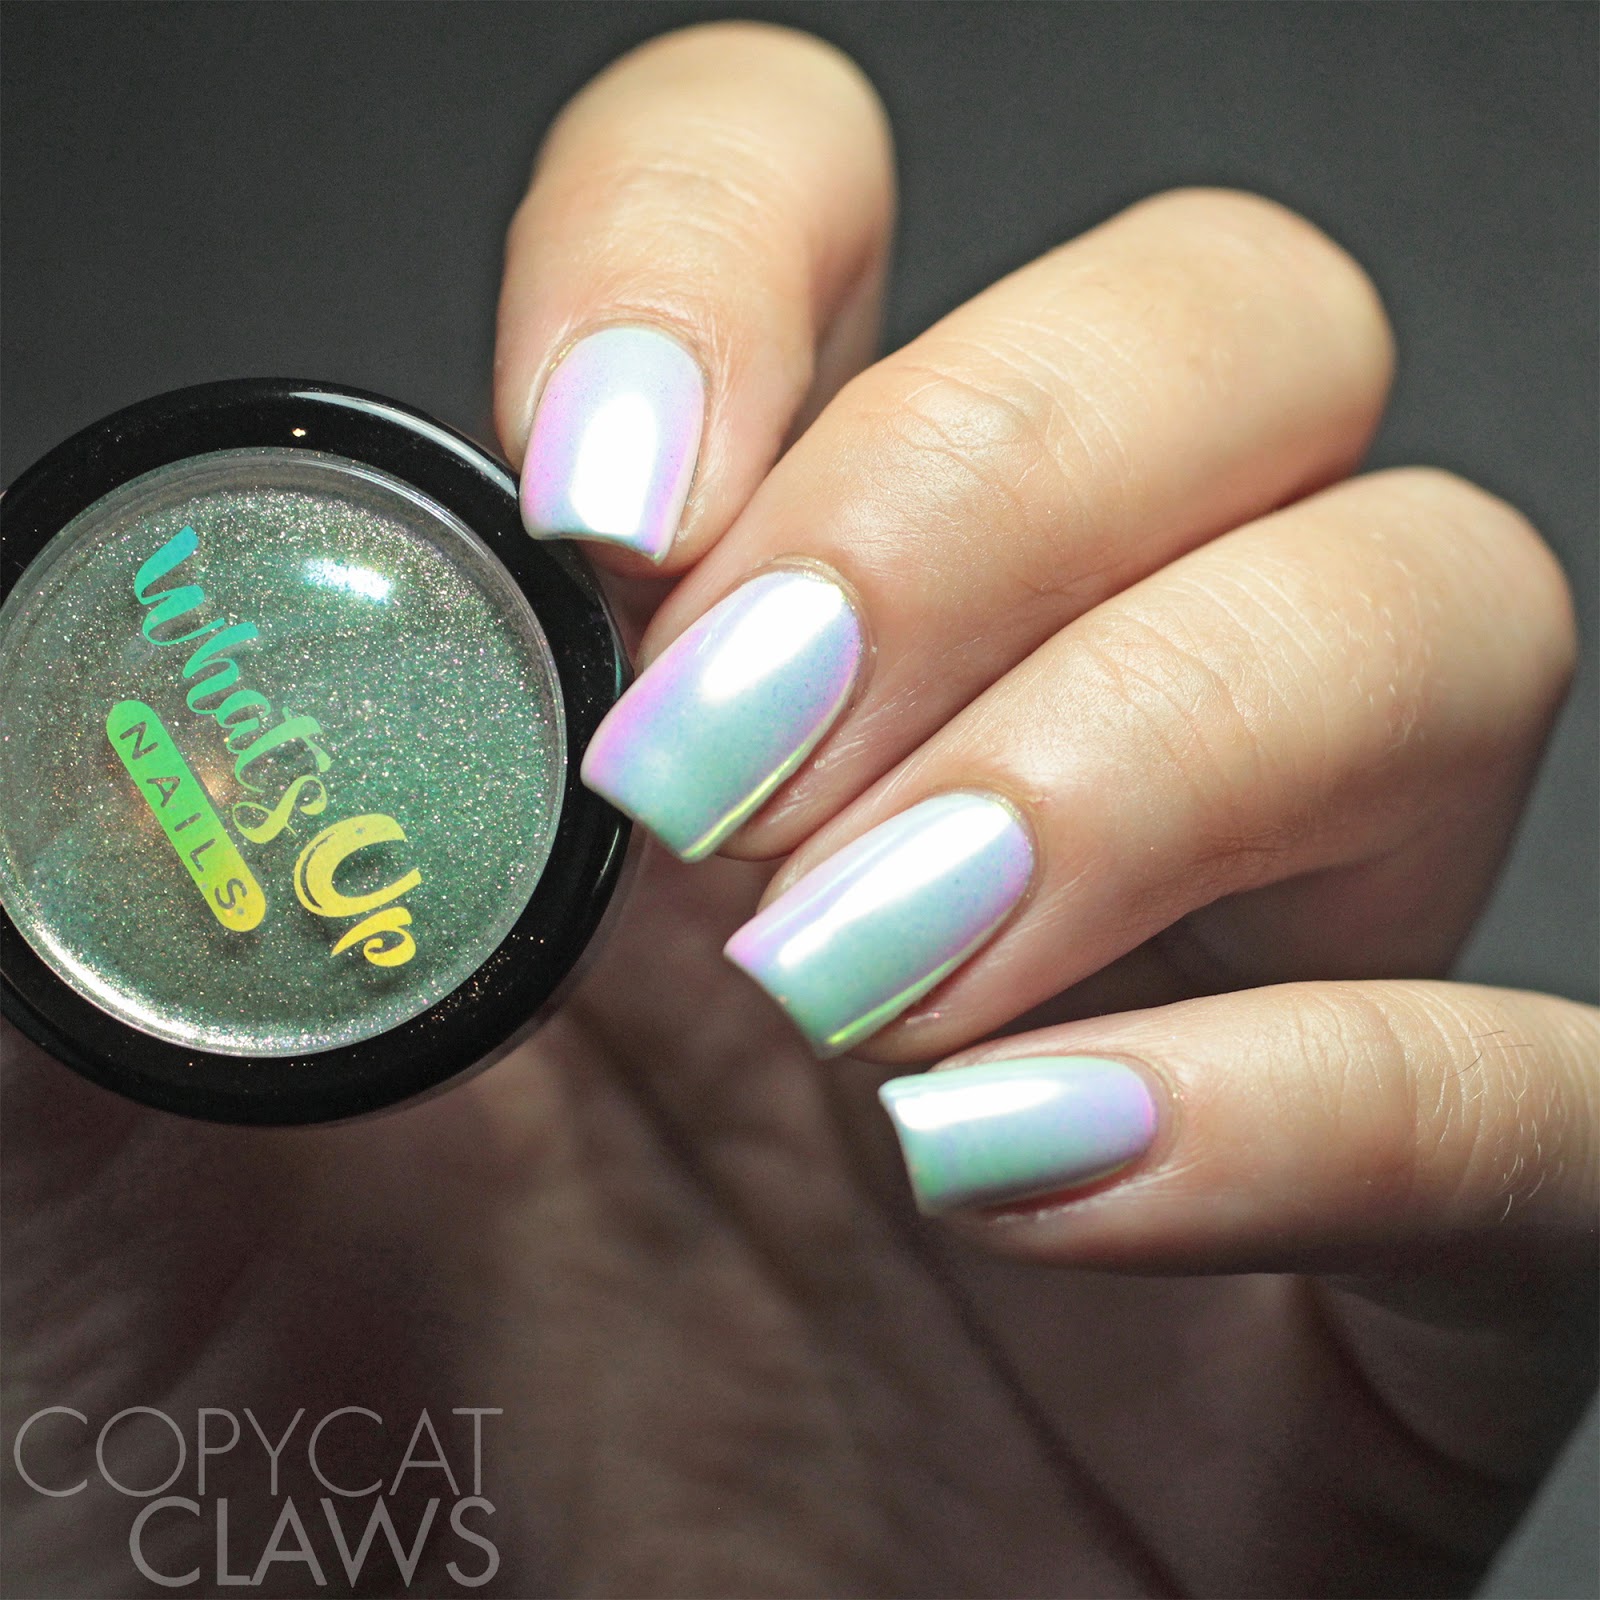 Copycat Claws: Whats Up Nails Aurora Pigment Review